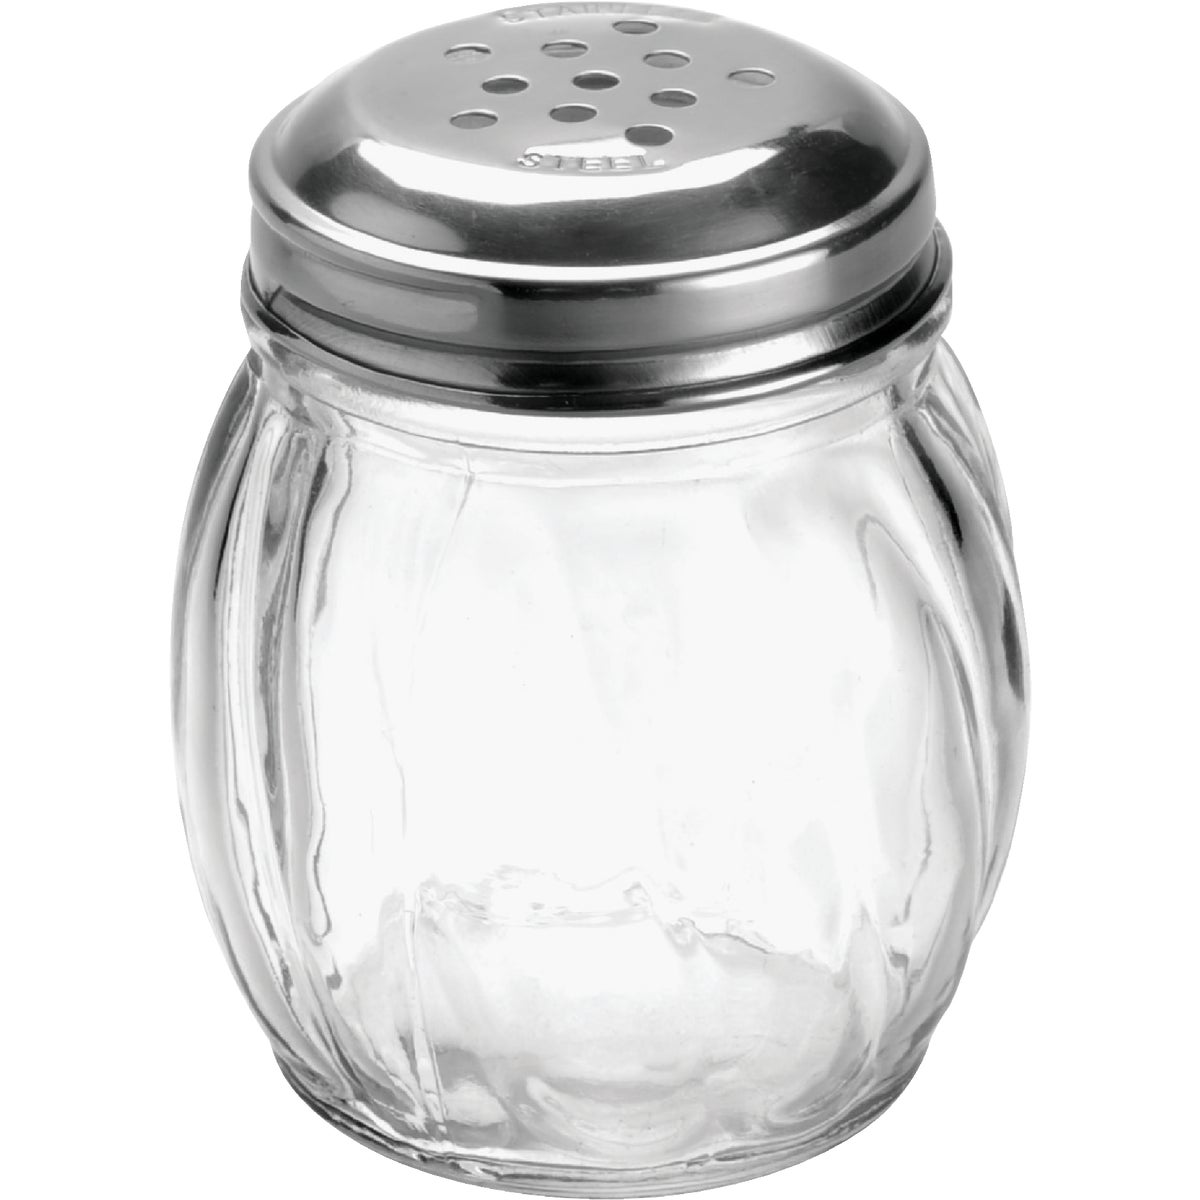 Gemco 5 Oz. Glass Cheese & Spice Shaker